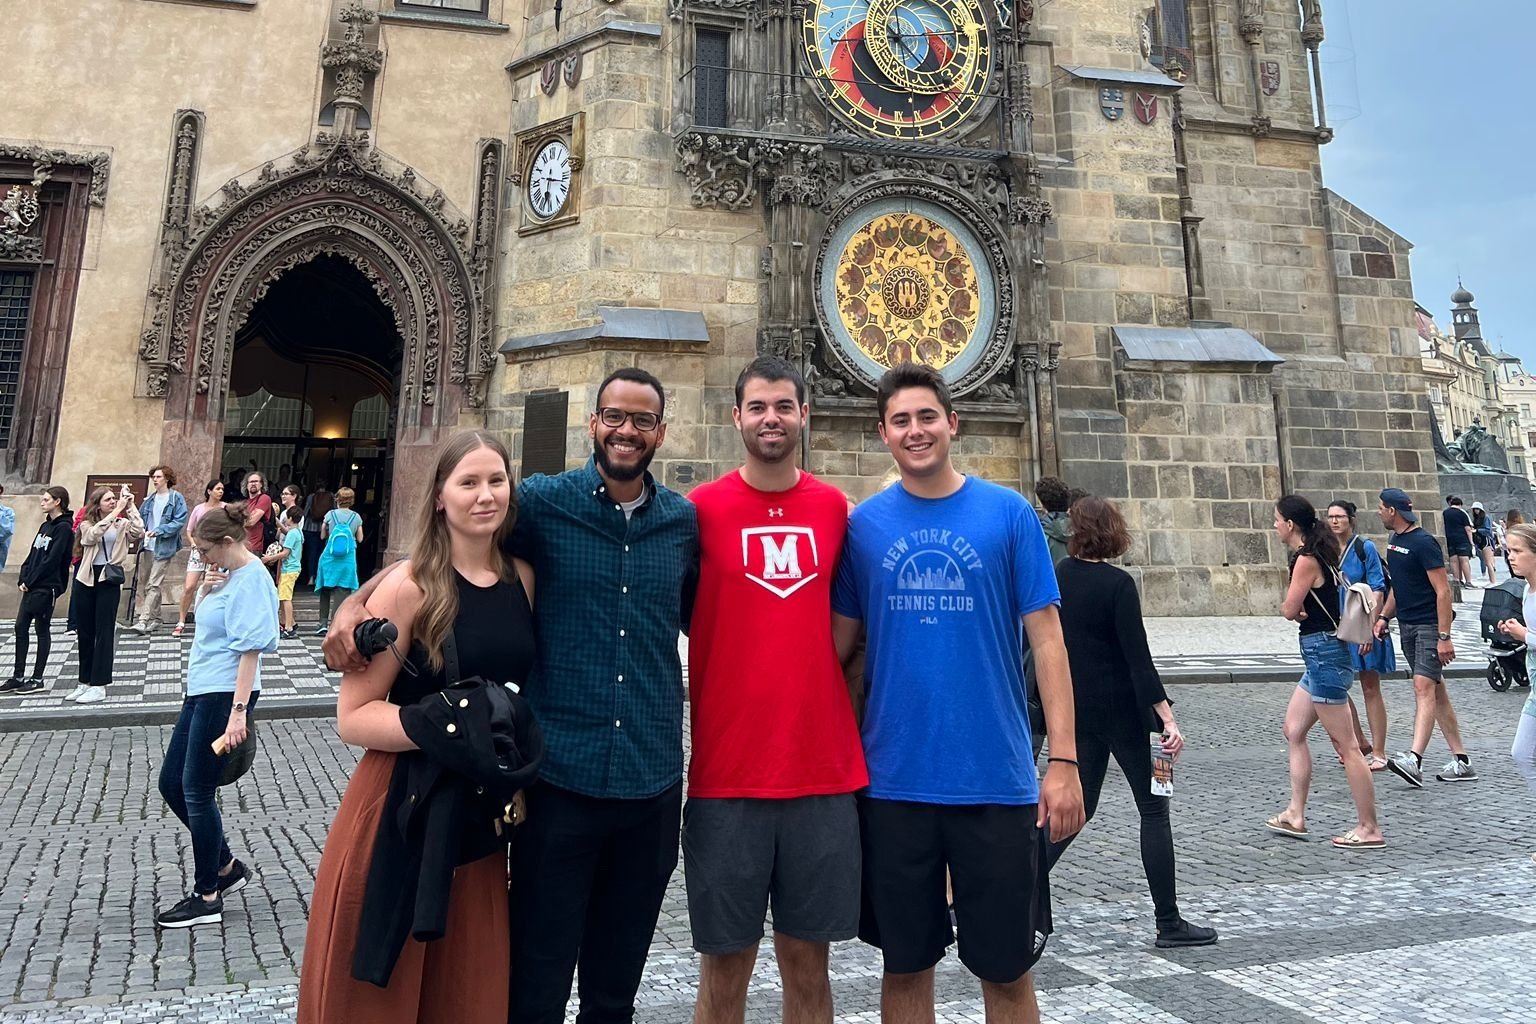 When former bunkmates Jack Heineman and Ben Putzer traveled to Prague they visited Katie Simova and Moises Torres who live together in the Czech Republic.